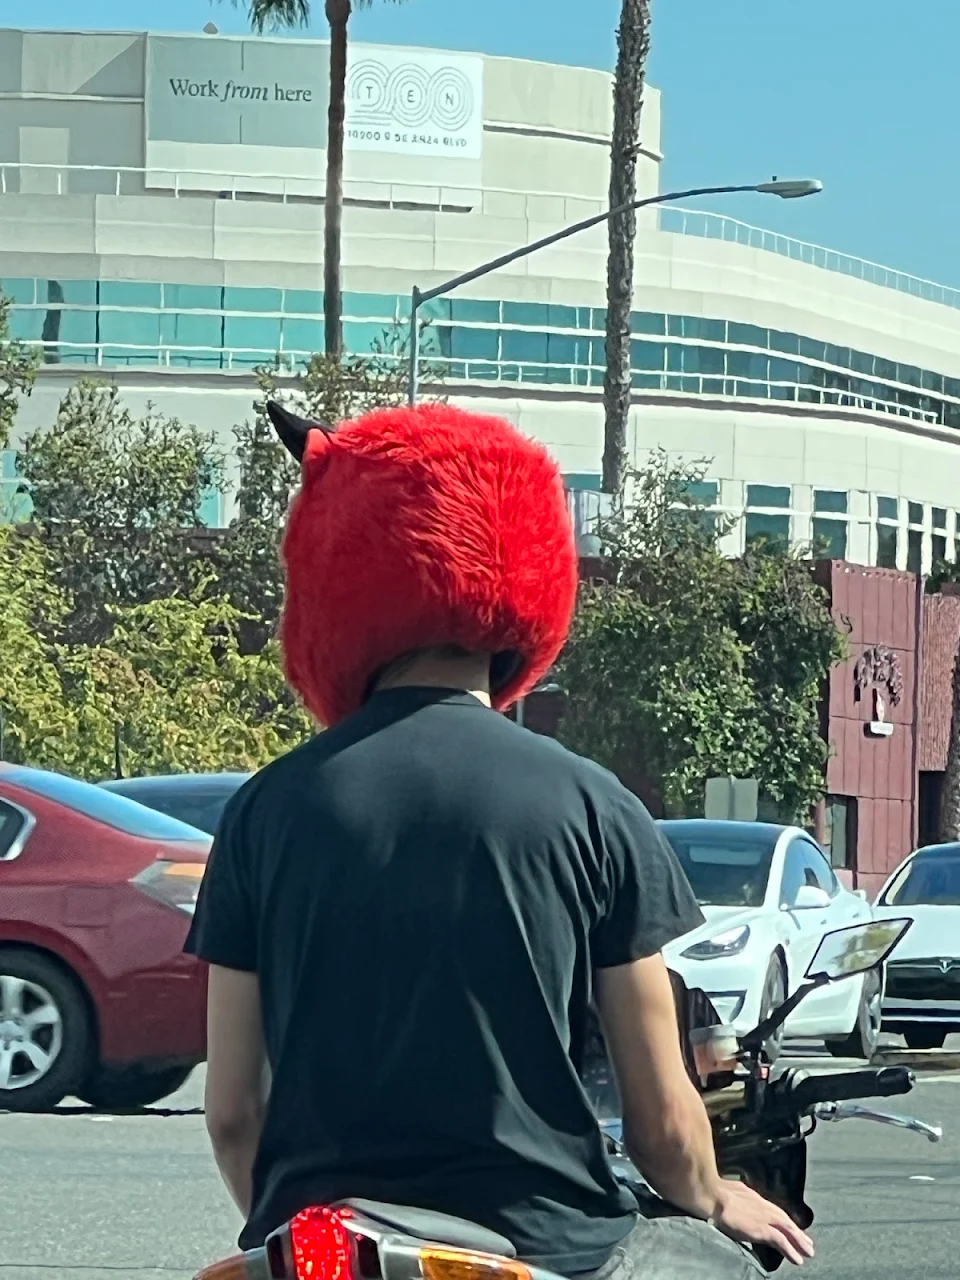 Saw this cool and adorable helmet today